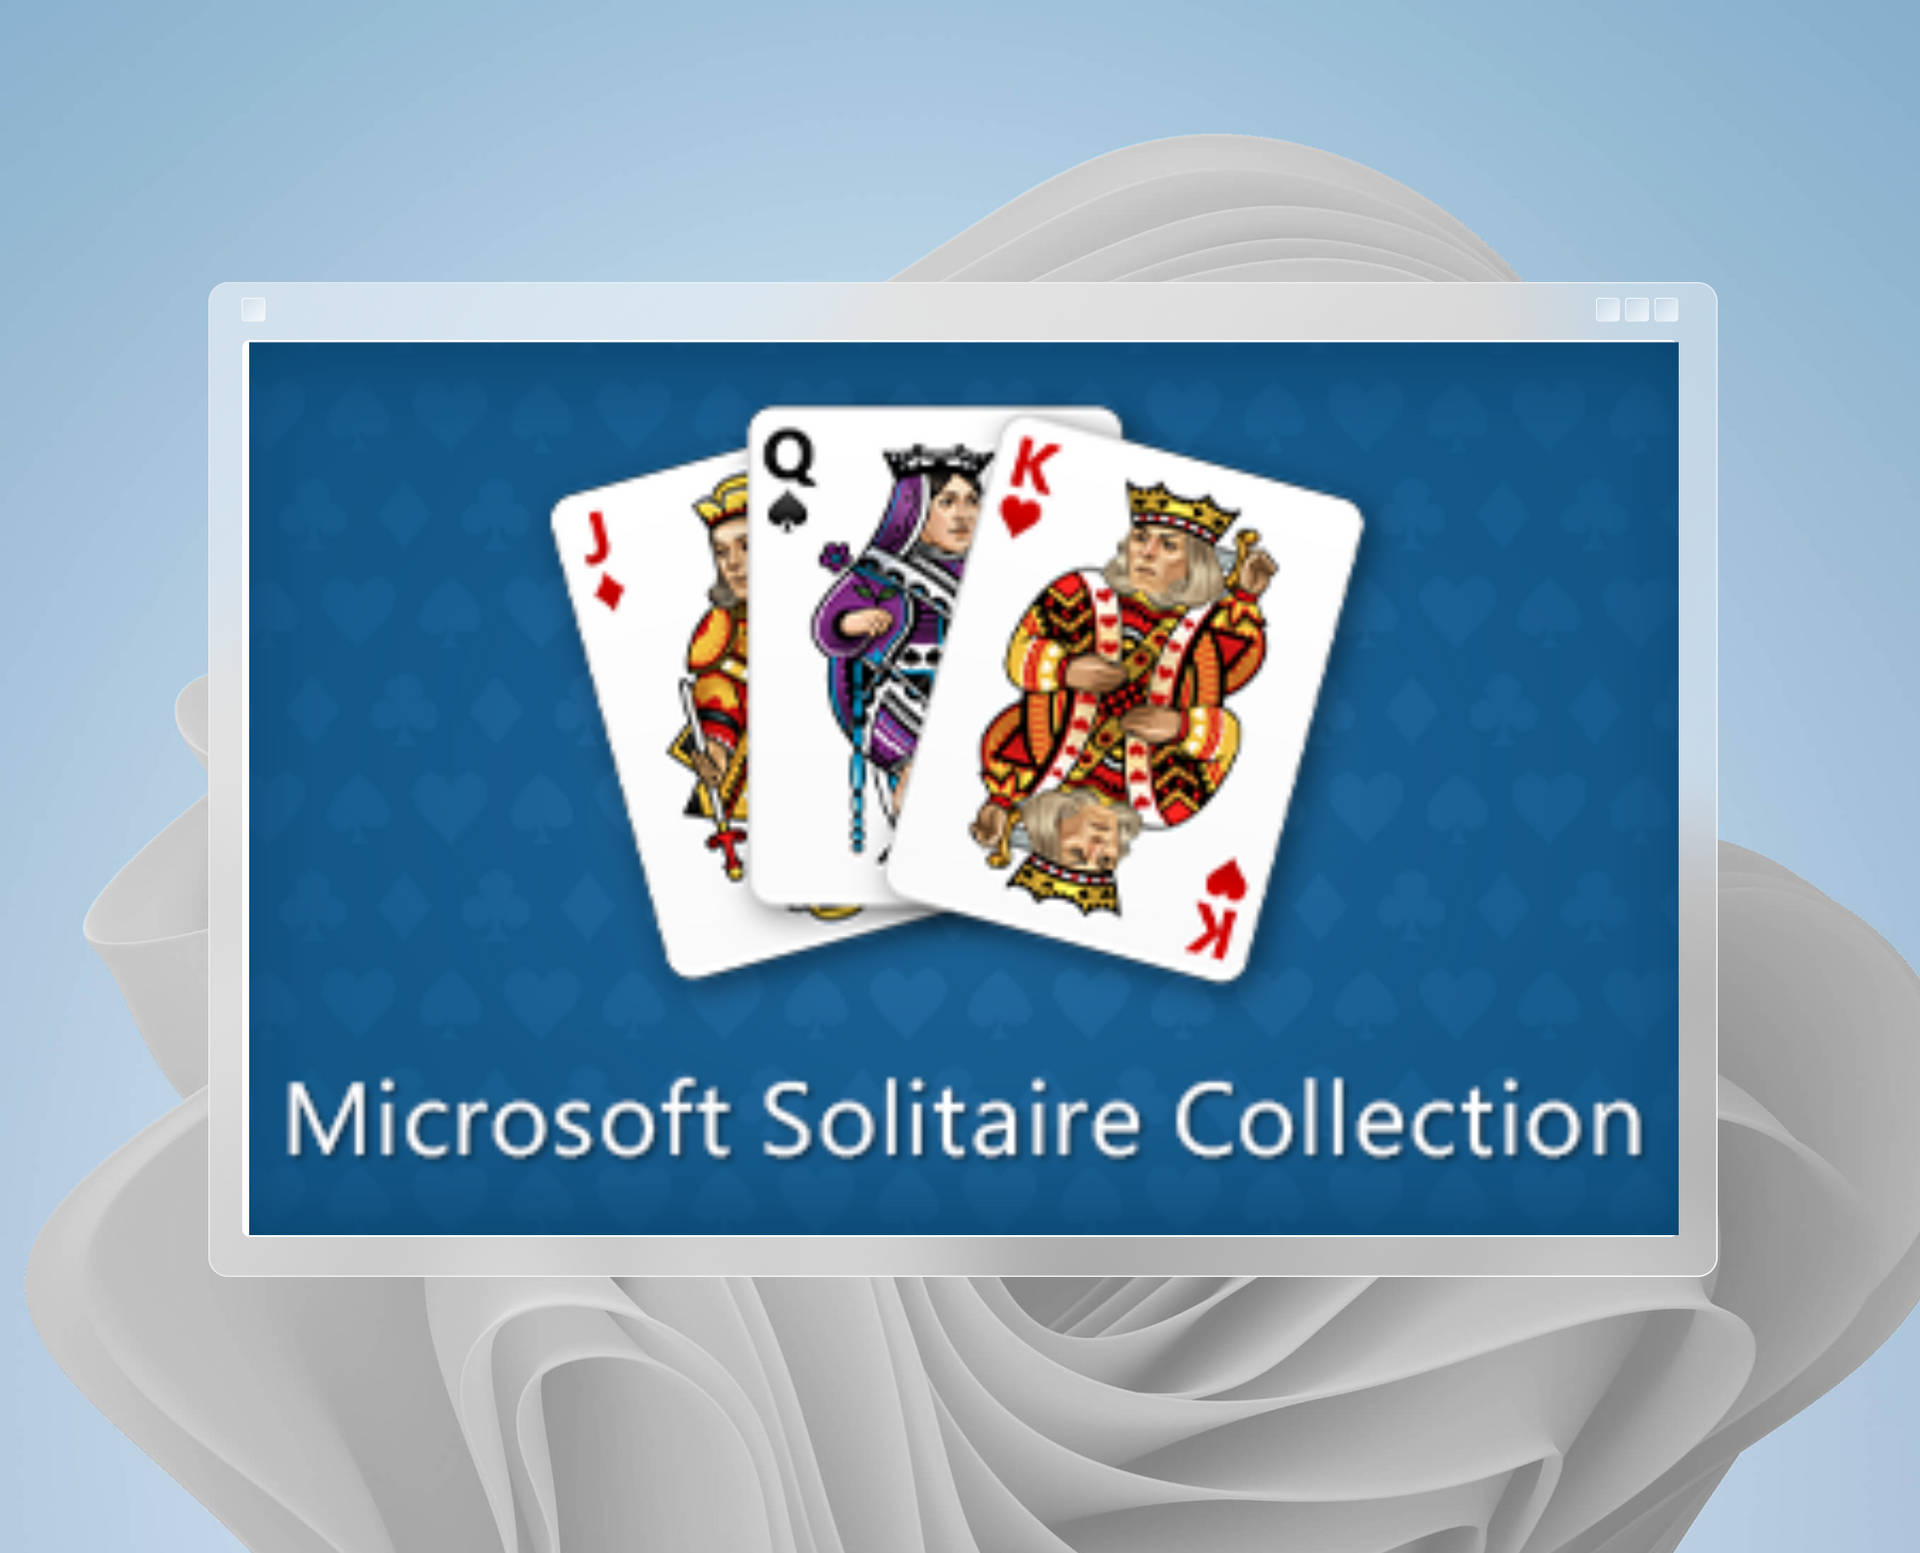 Microsoft Solitaire Collection Computer Game Wallpaper